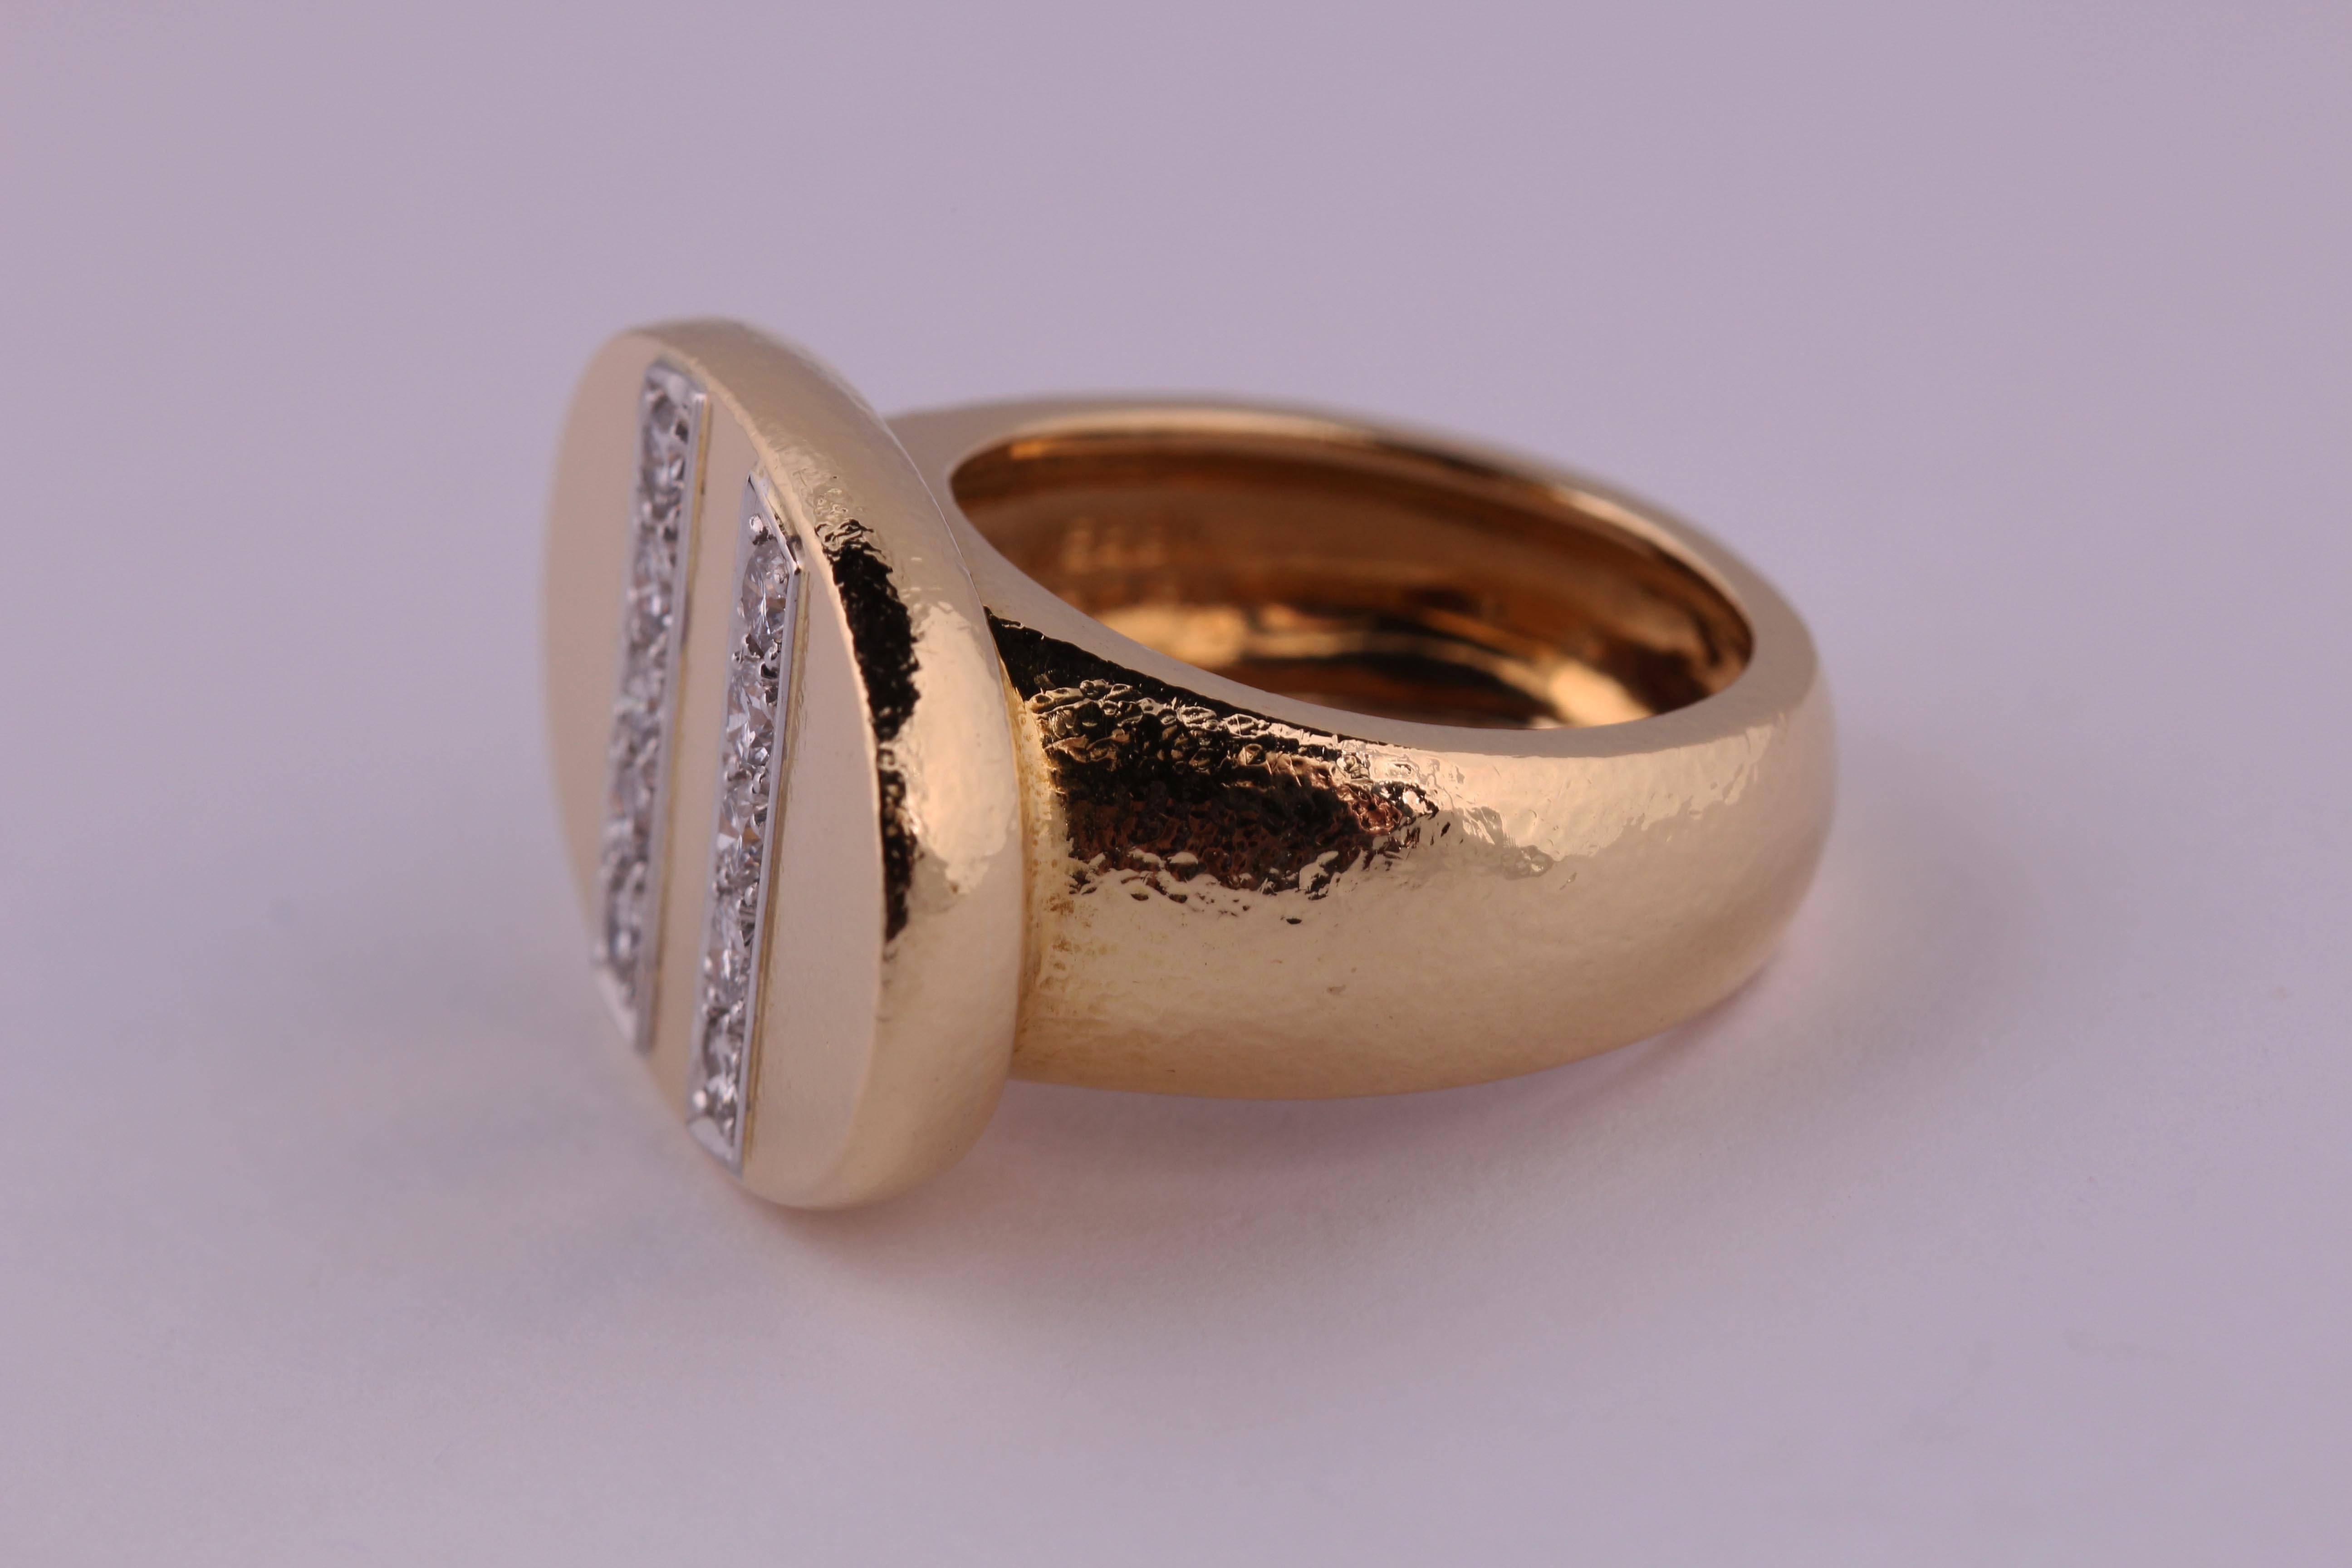 A ring featuring diamonds set in 18 ct yellow gold and platinum. 
David Webb hallmark, numbered CP166
Size: 6.25 (USA), 53 (Europe)
The ring top measures 24.1 x 16. mm
Certificate of authenticity